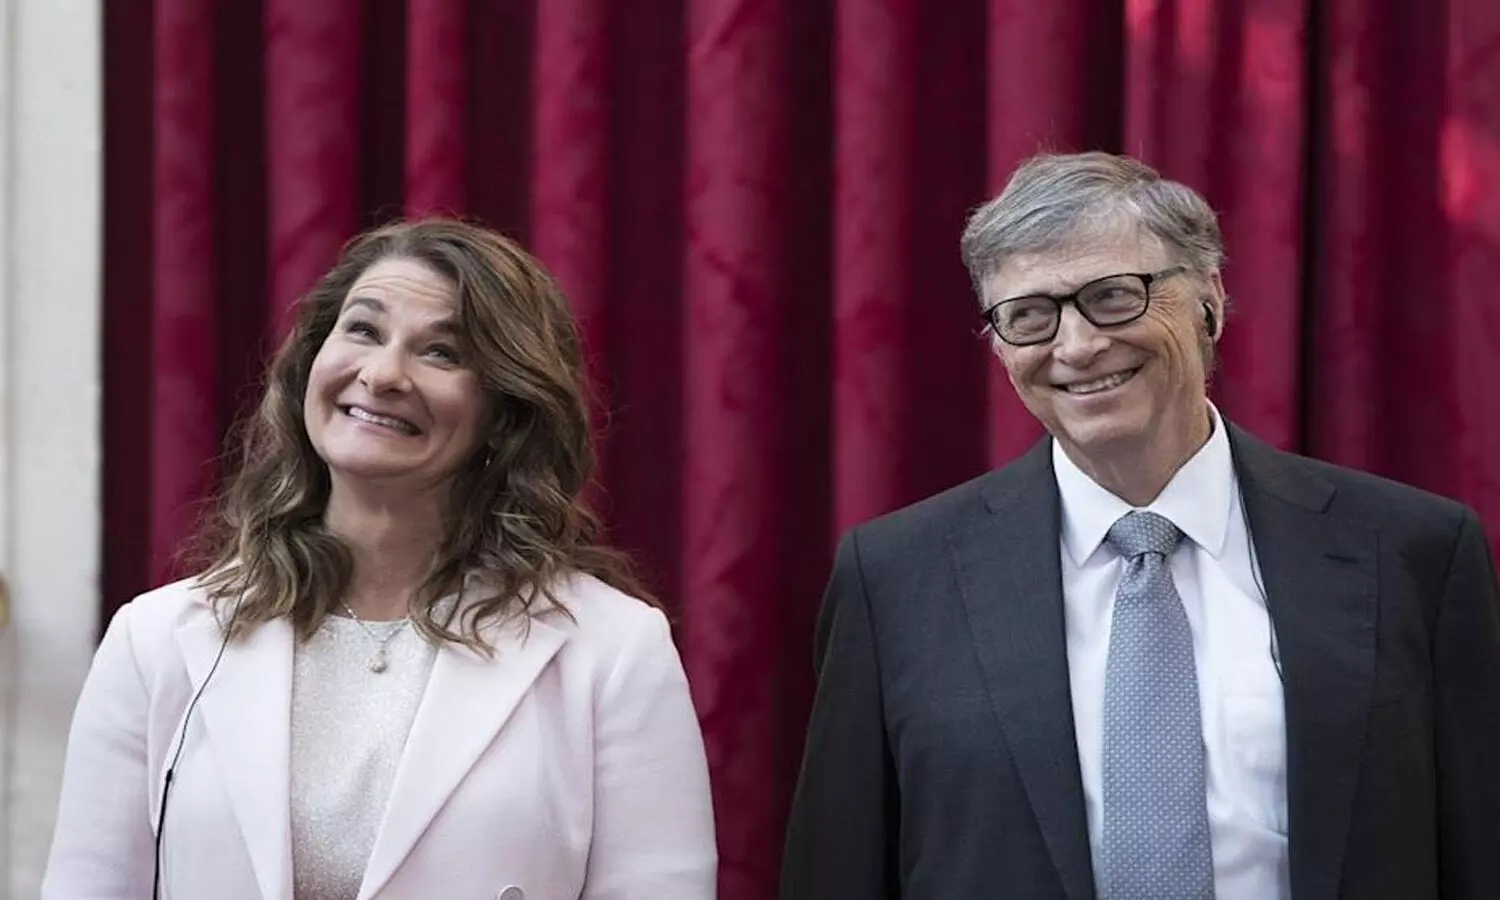 Potential of AI: Insights from Bill Gates